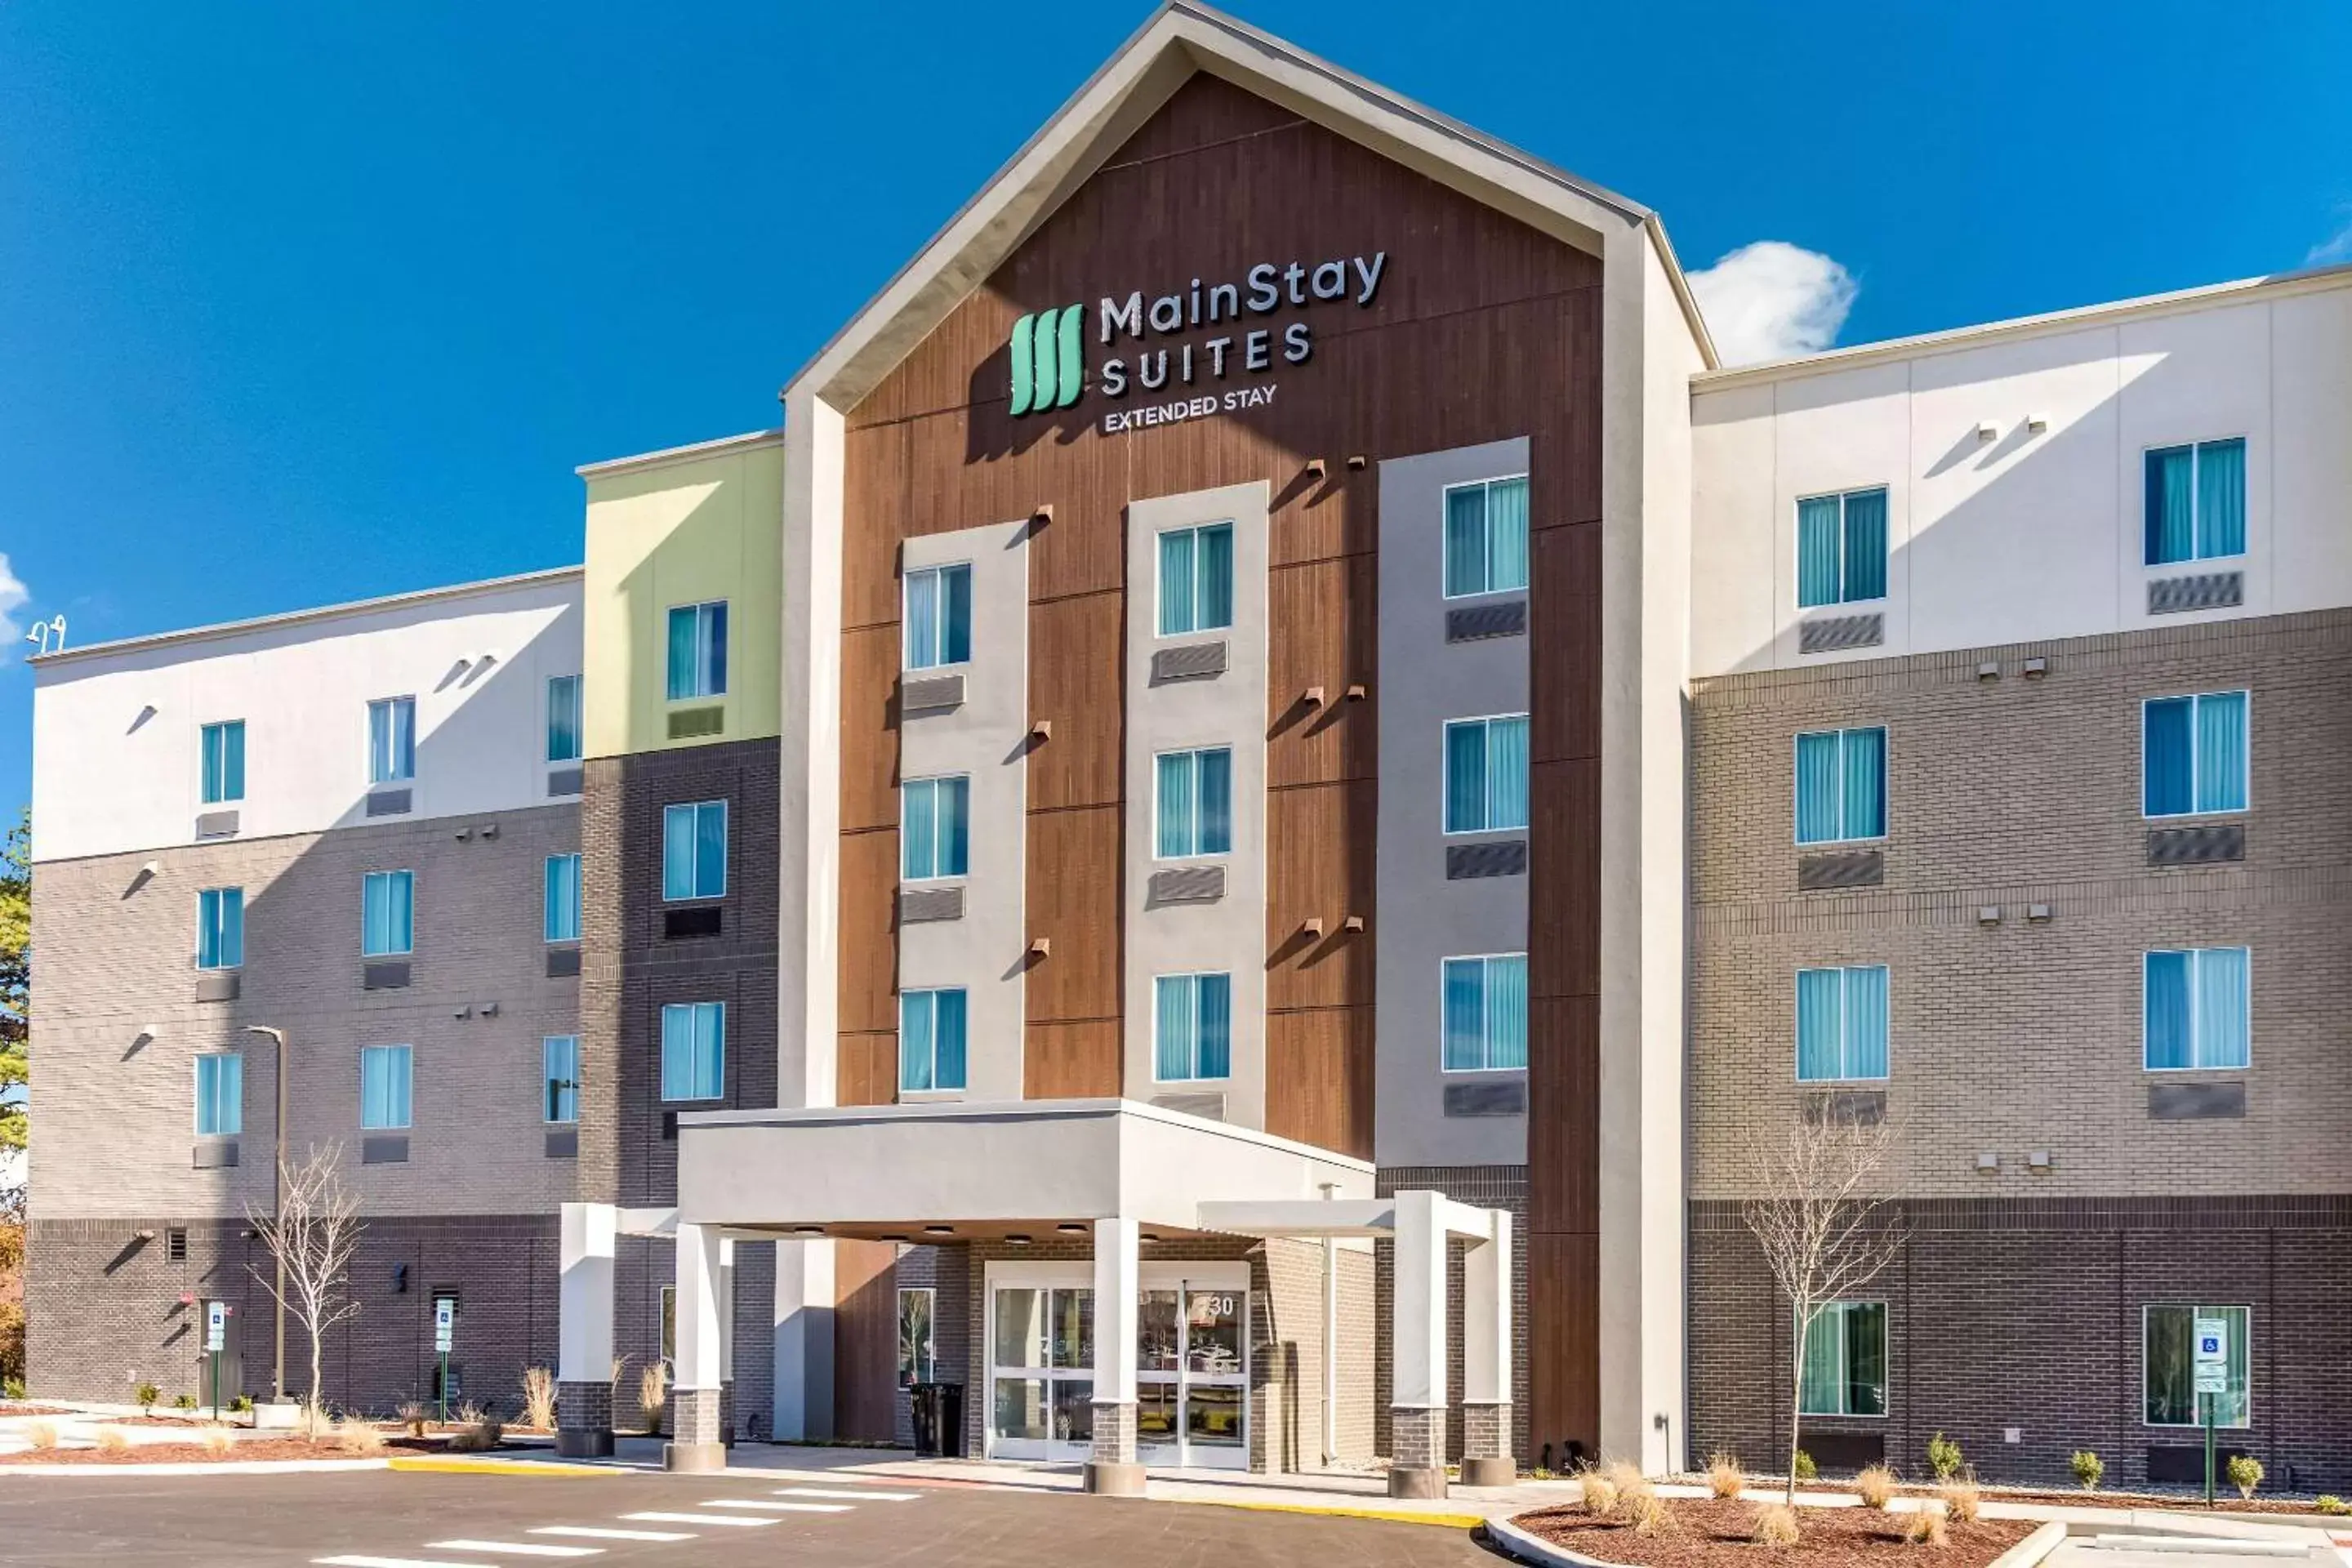 Property Building in MainStay Suites Murfreesboro